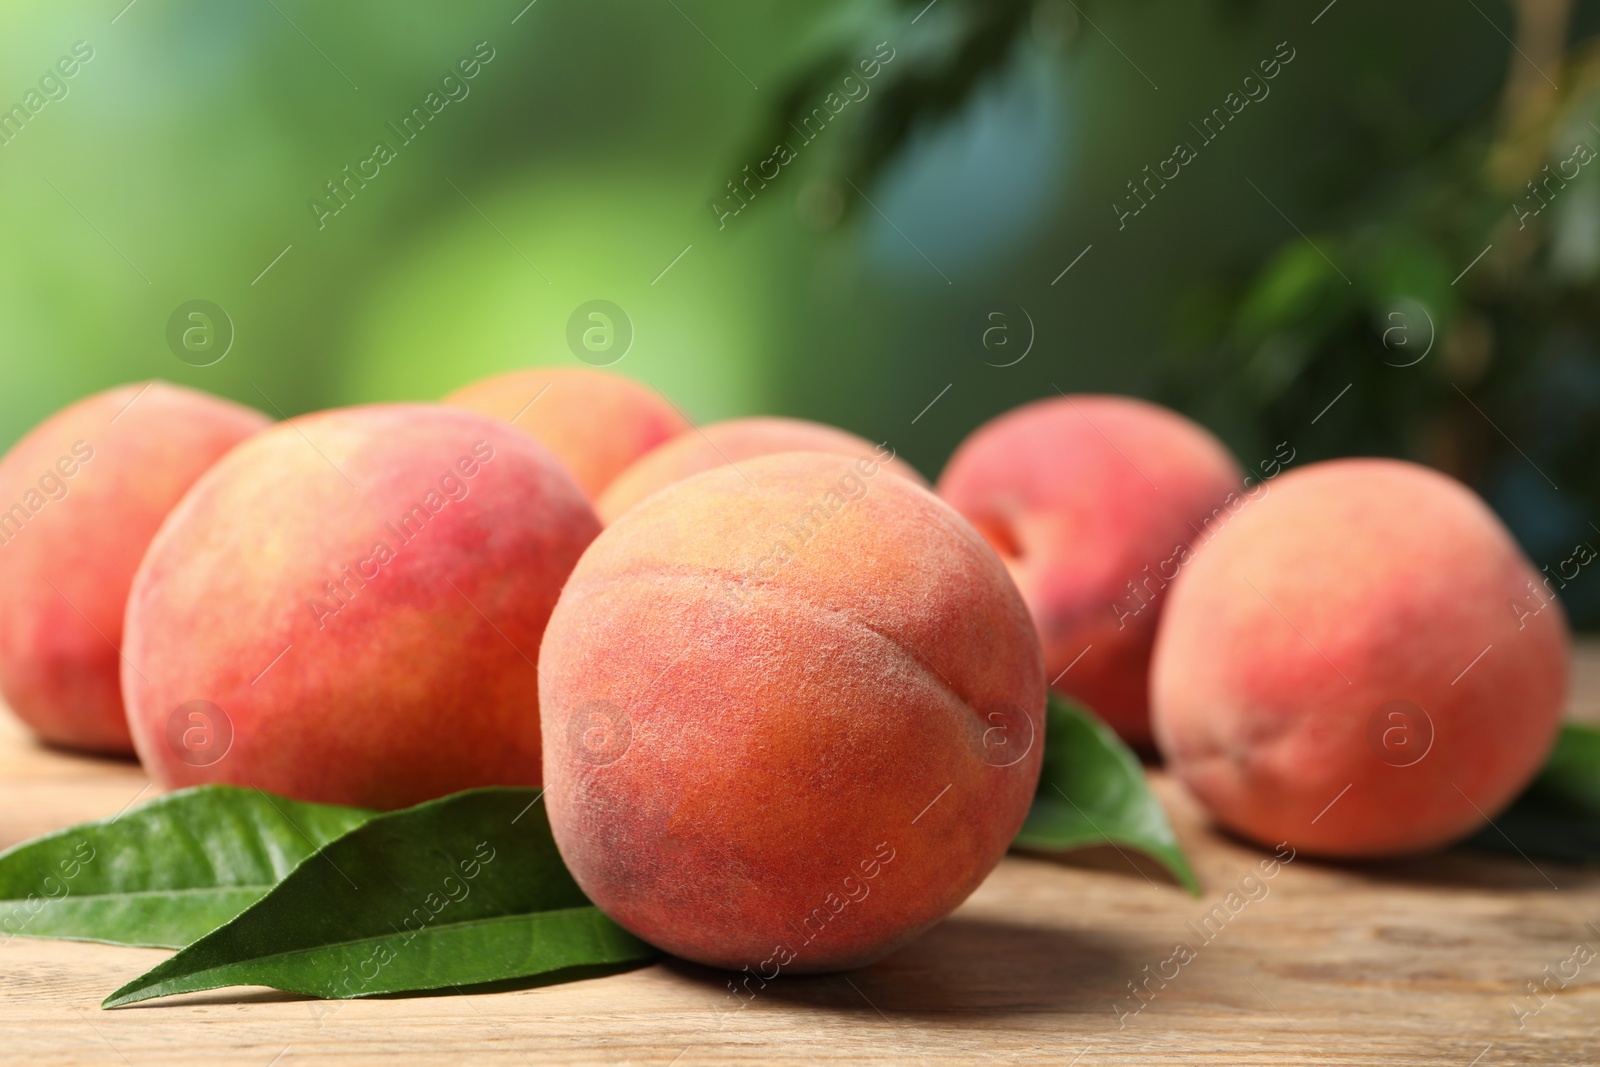 Photo of Fresh peaches and leaves on wooden table against blurred background, closeup